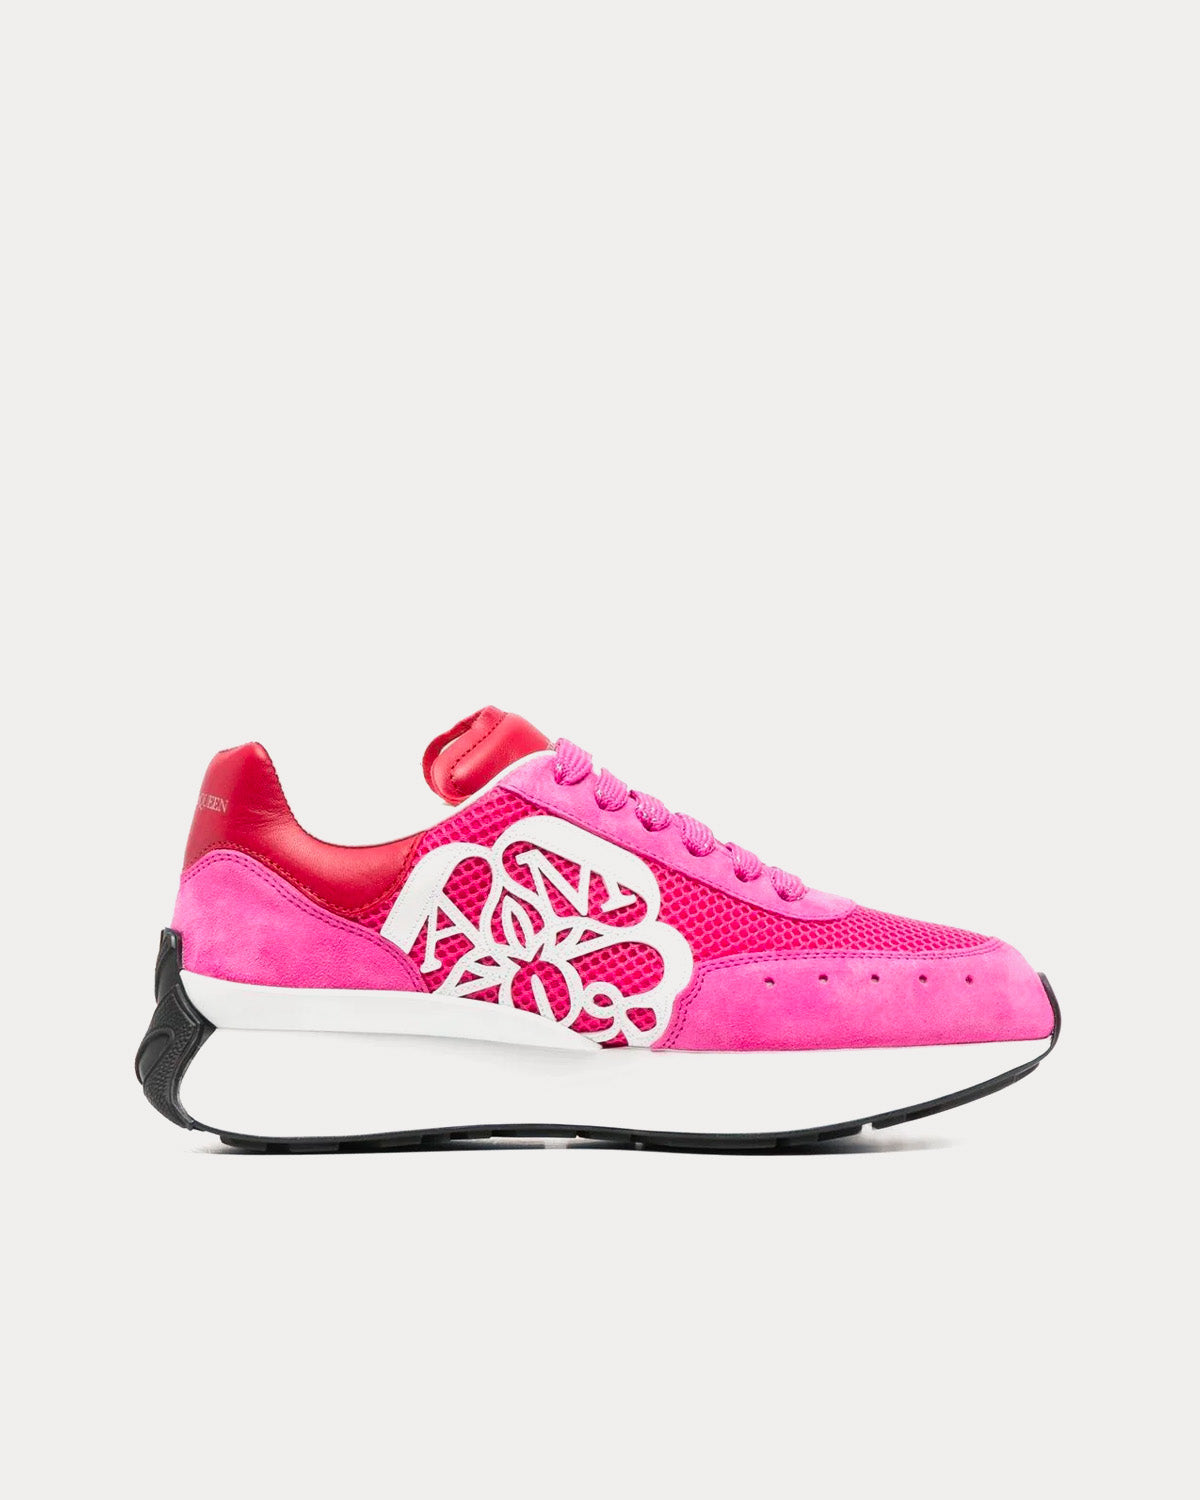 Oversized Sneakers - Alexander Mcqueen - White/Pink - Leather